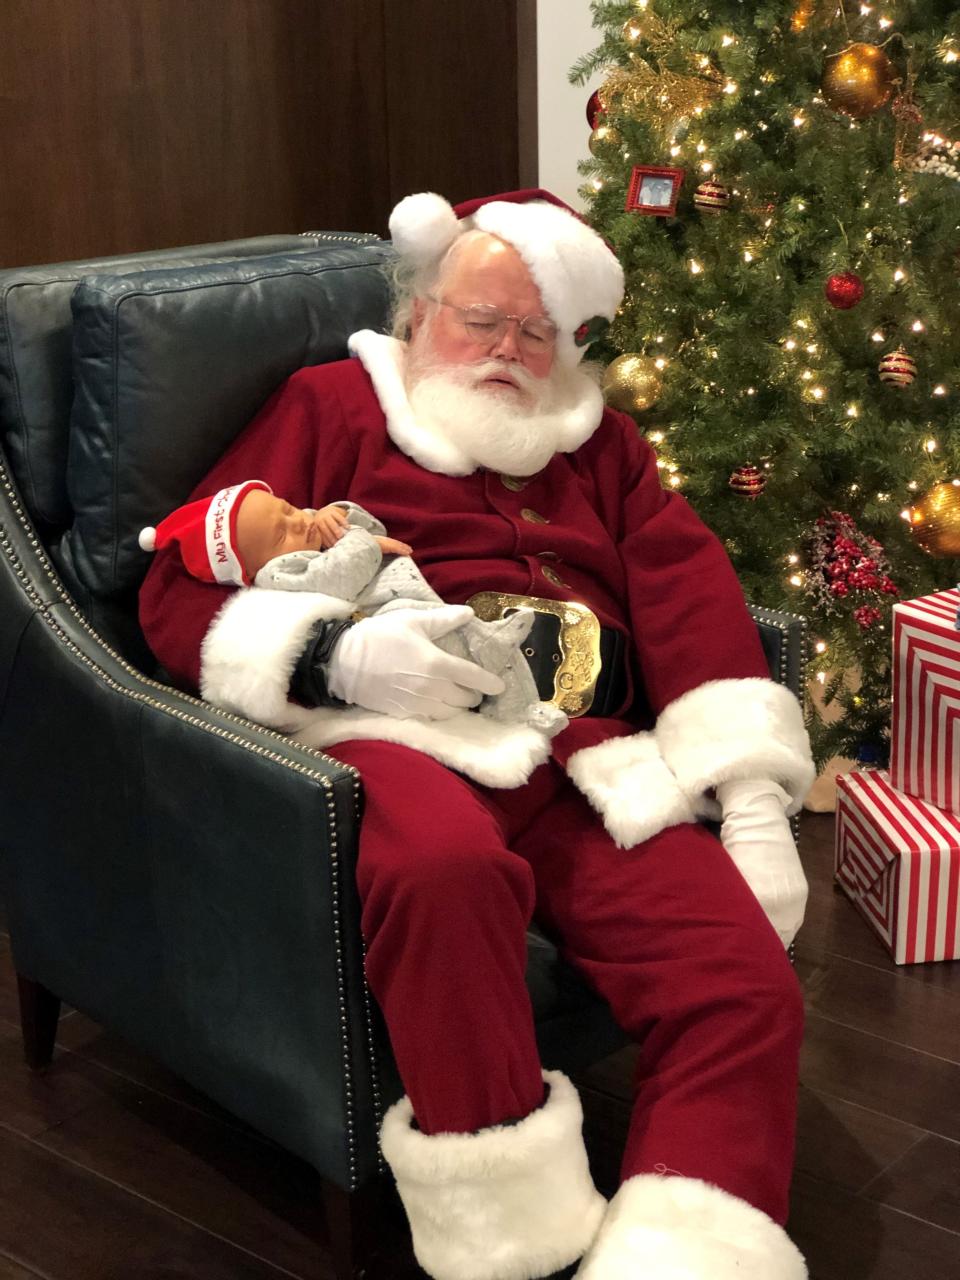 Samuel Turner is pictured at 15 days old with Santa Claus at a Christmas brunch at Valhalla Golf Club on Dec. 1.